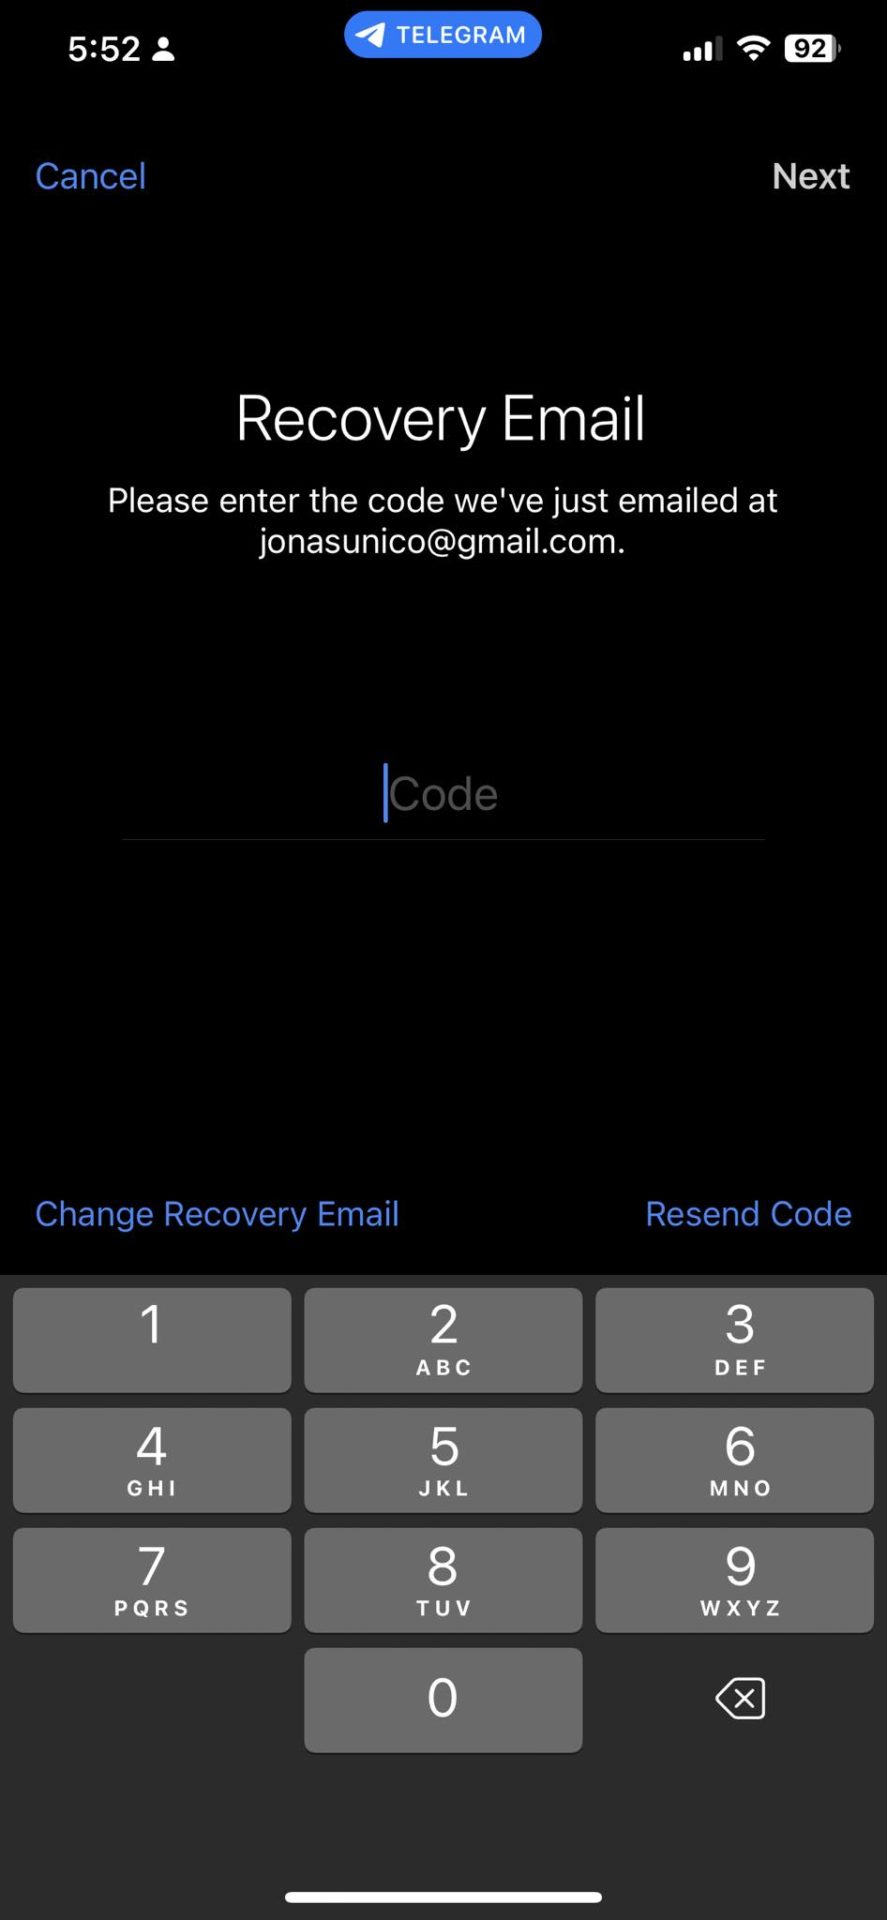 Adding recovery email to Telegram 2FA